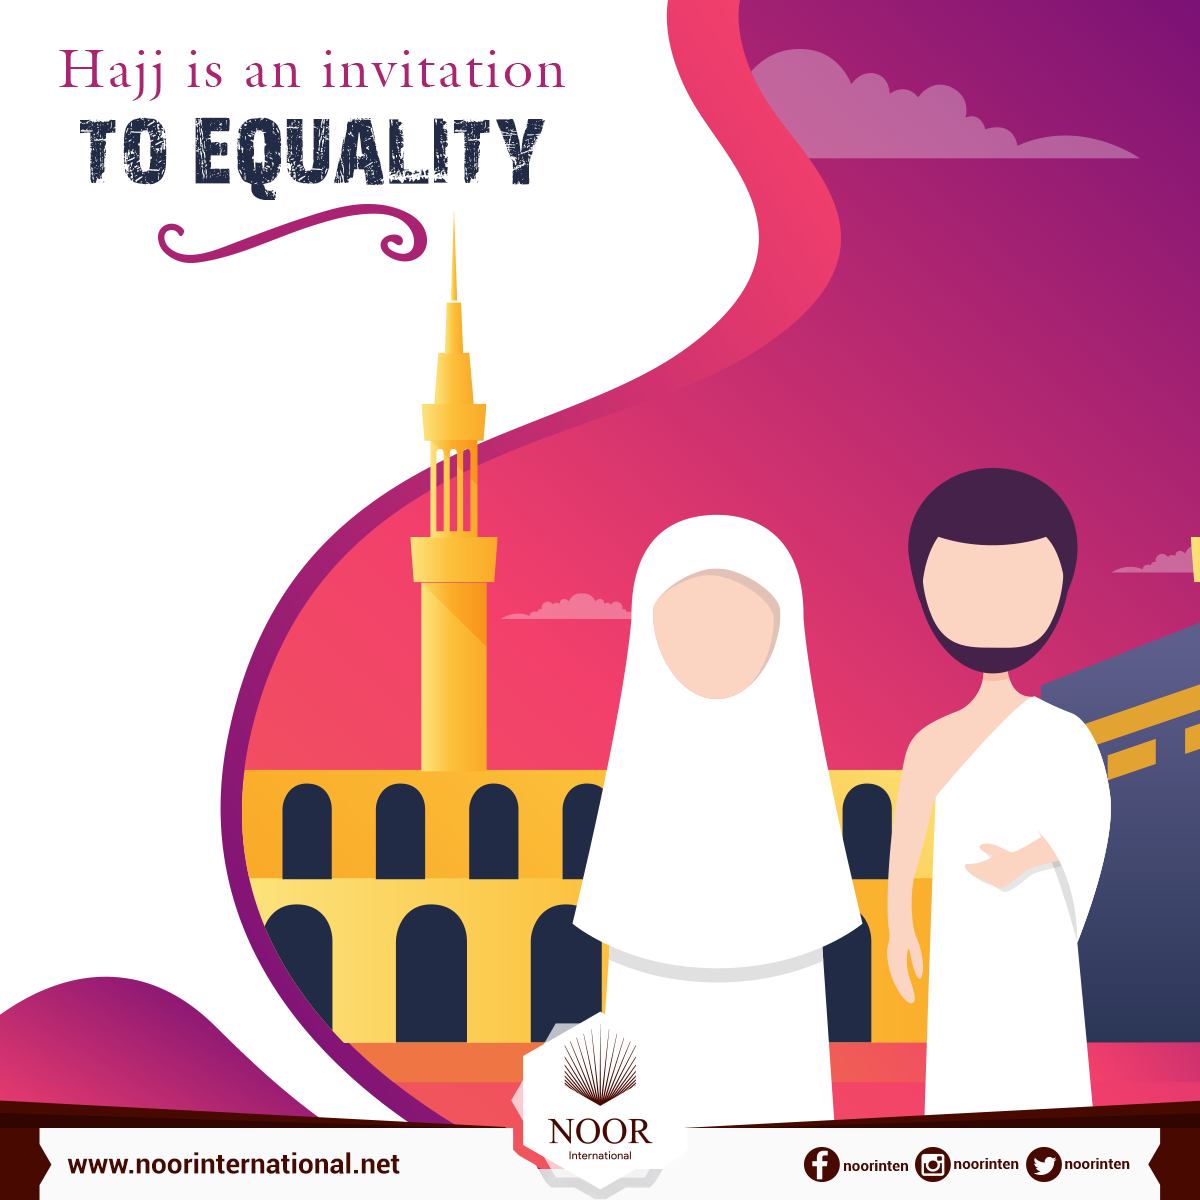 Hajj is an invitation to equality